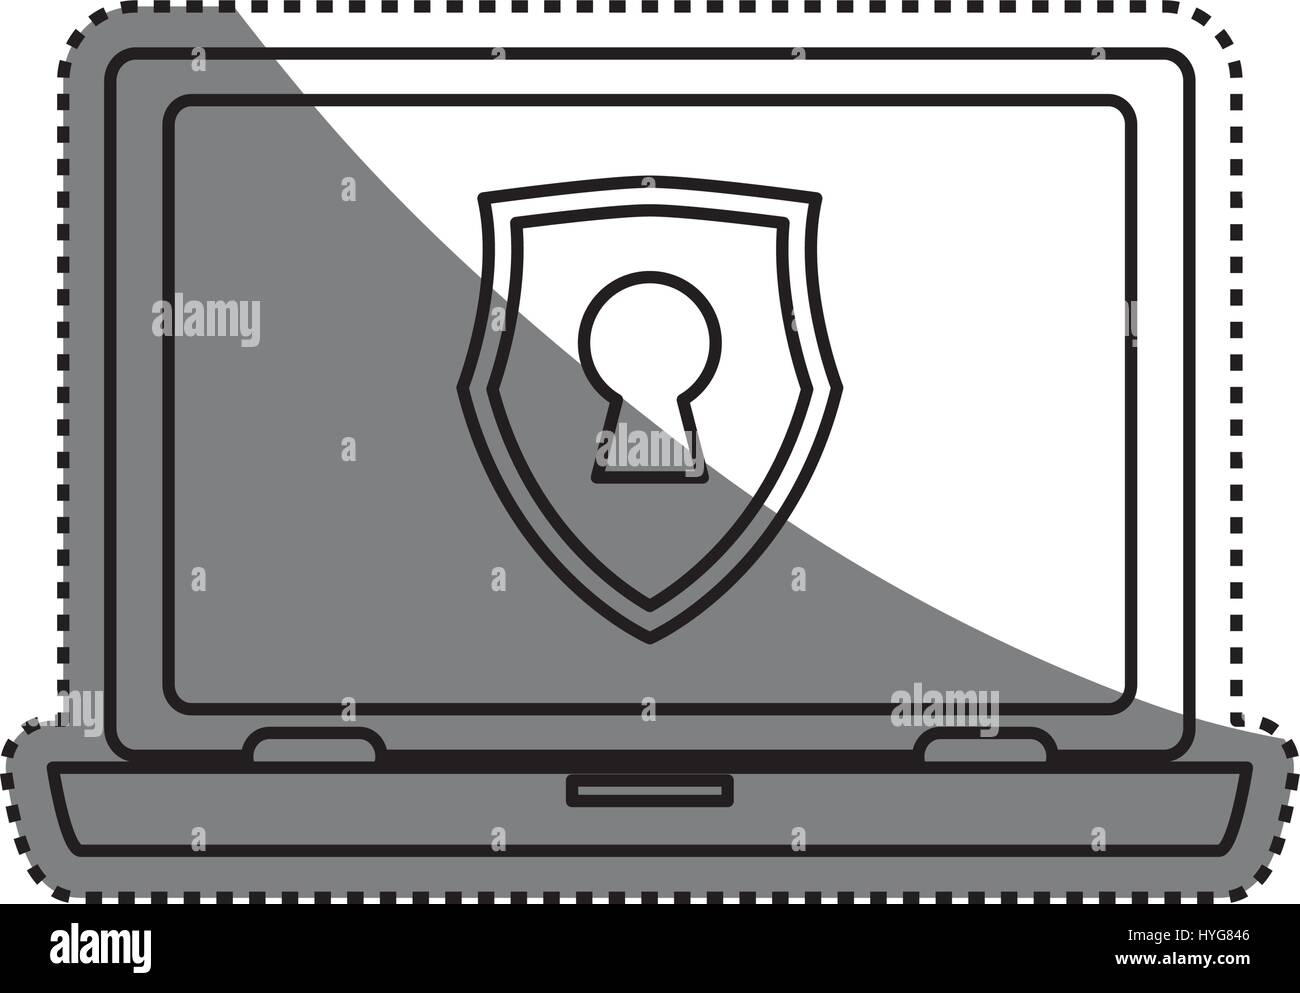 computer lock security privacy Stock Vector